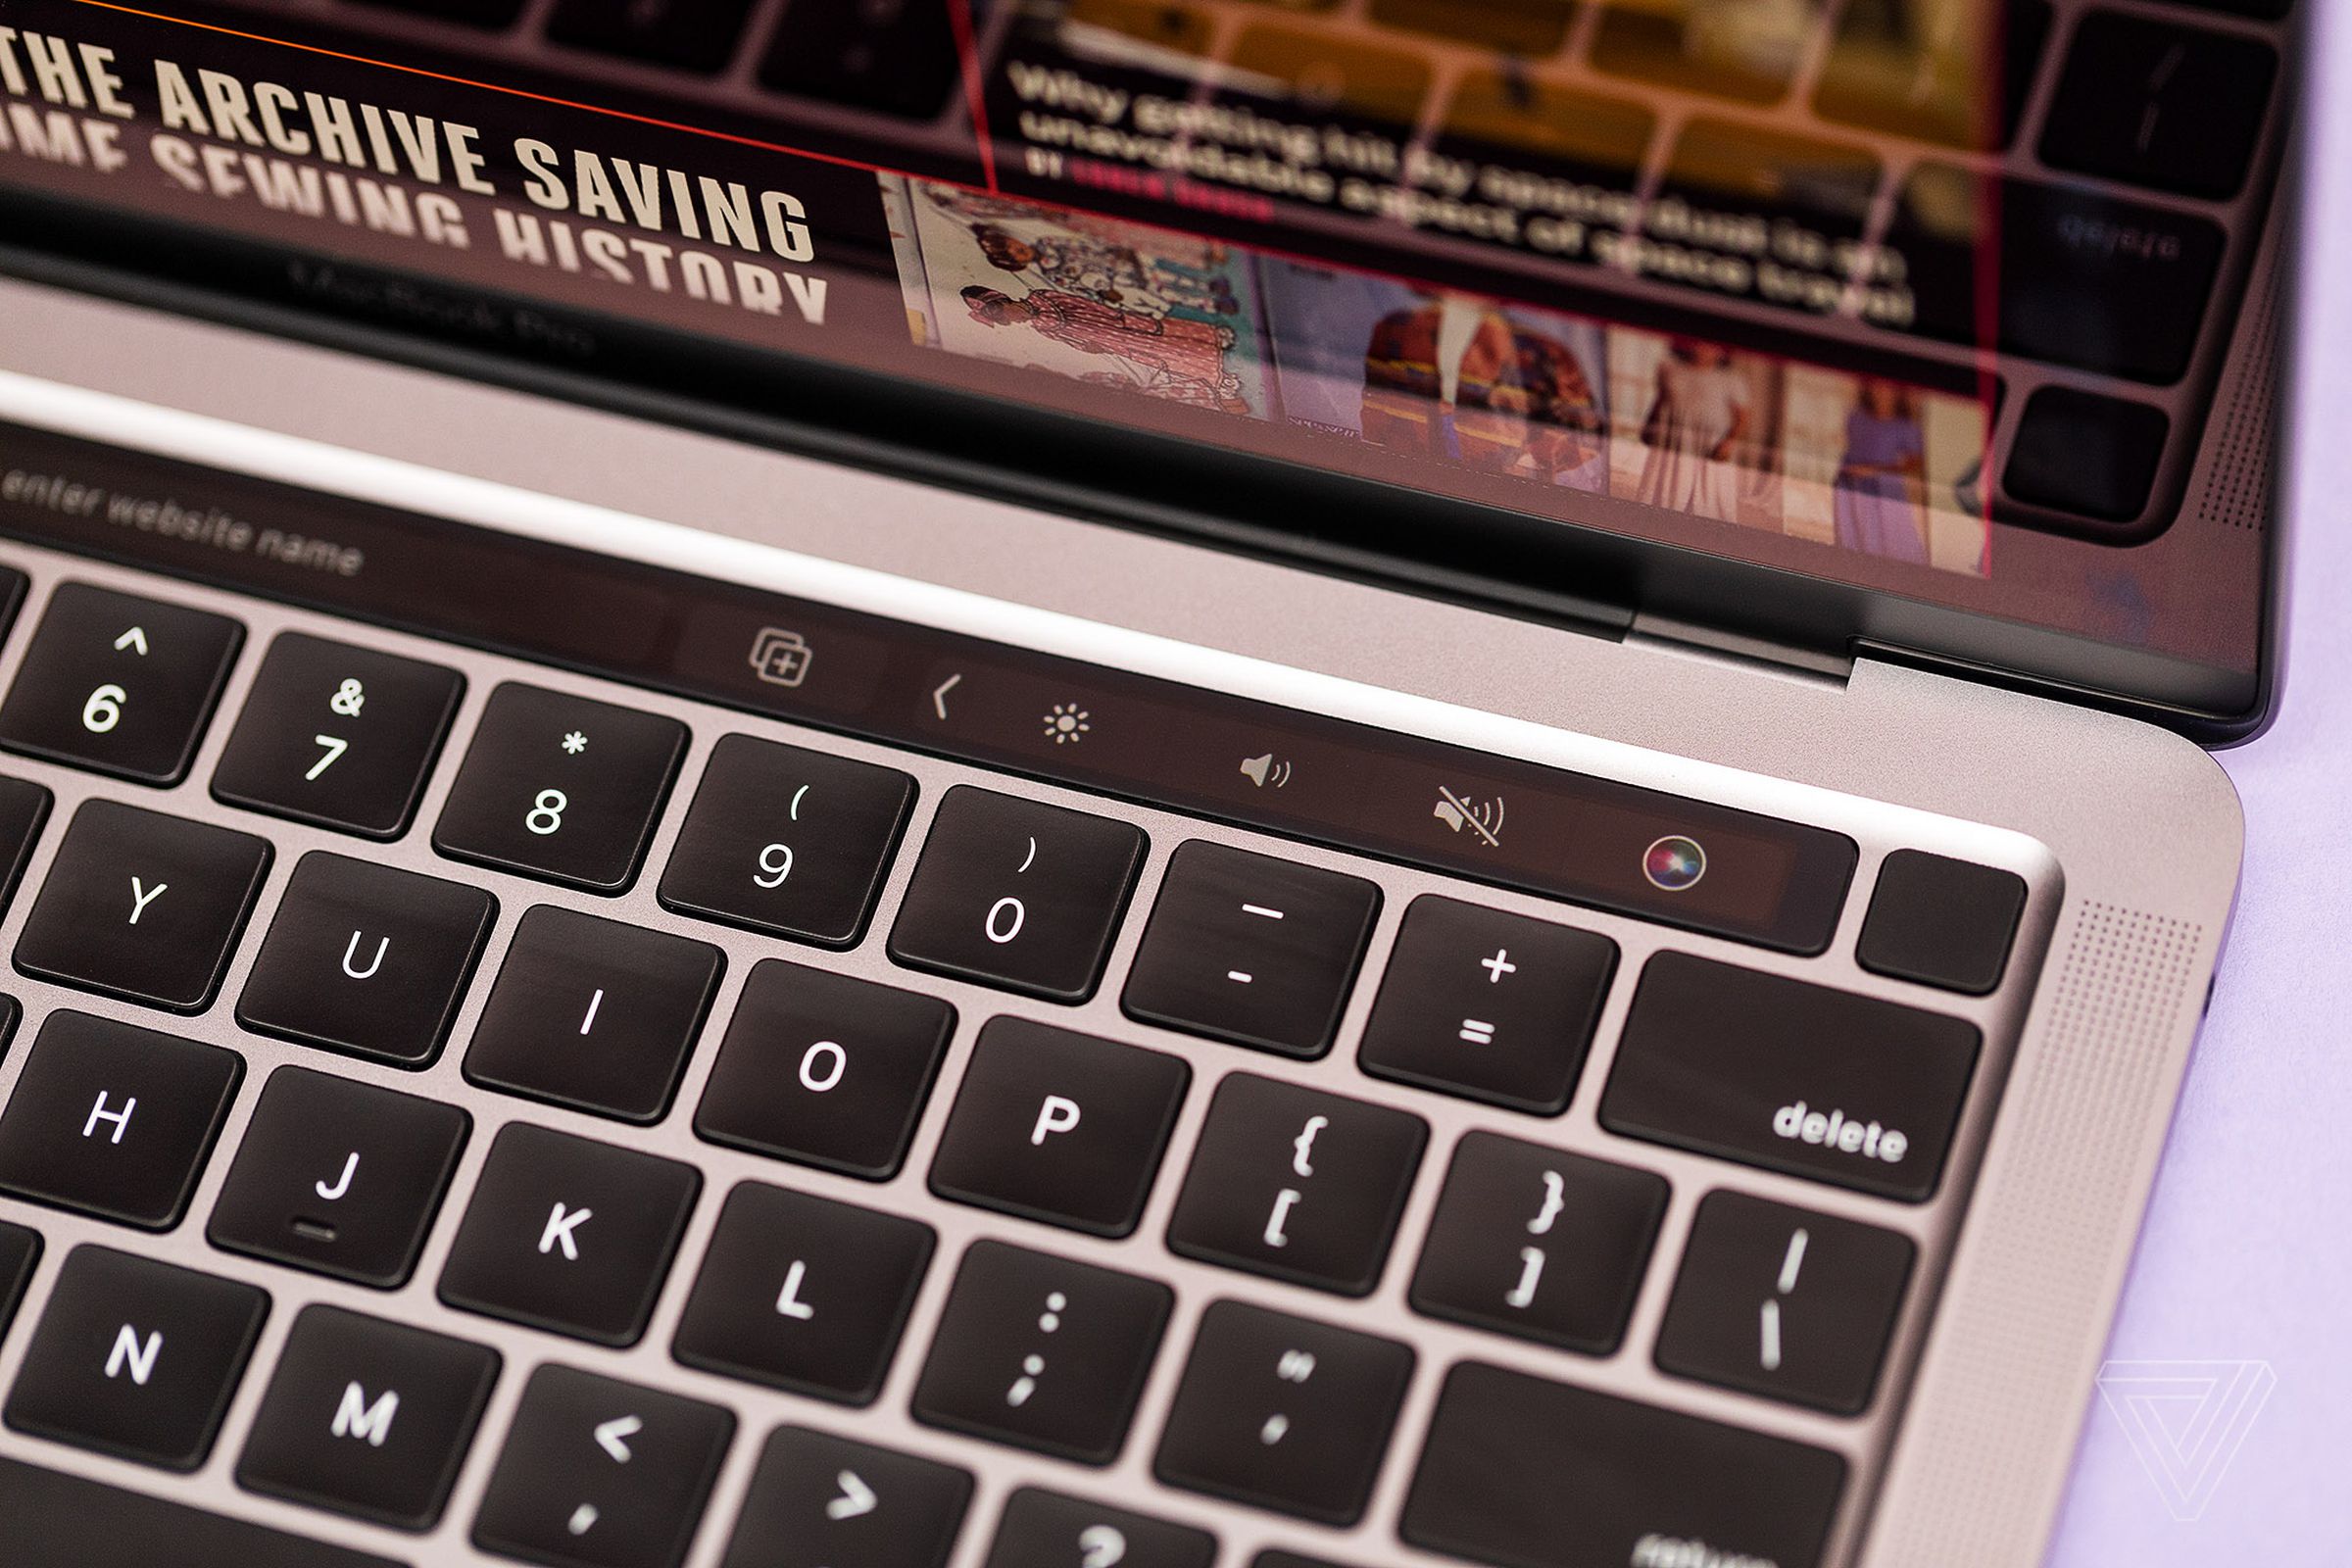 The upper right corner of the MacBook Pro keyboard